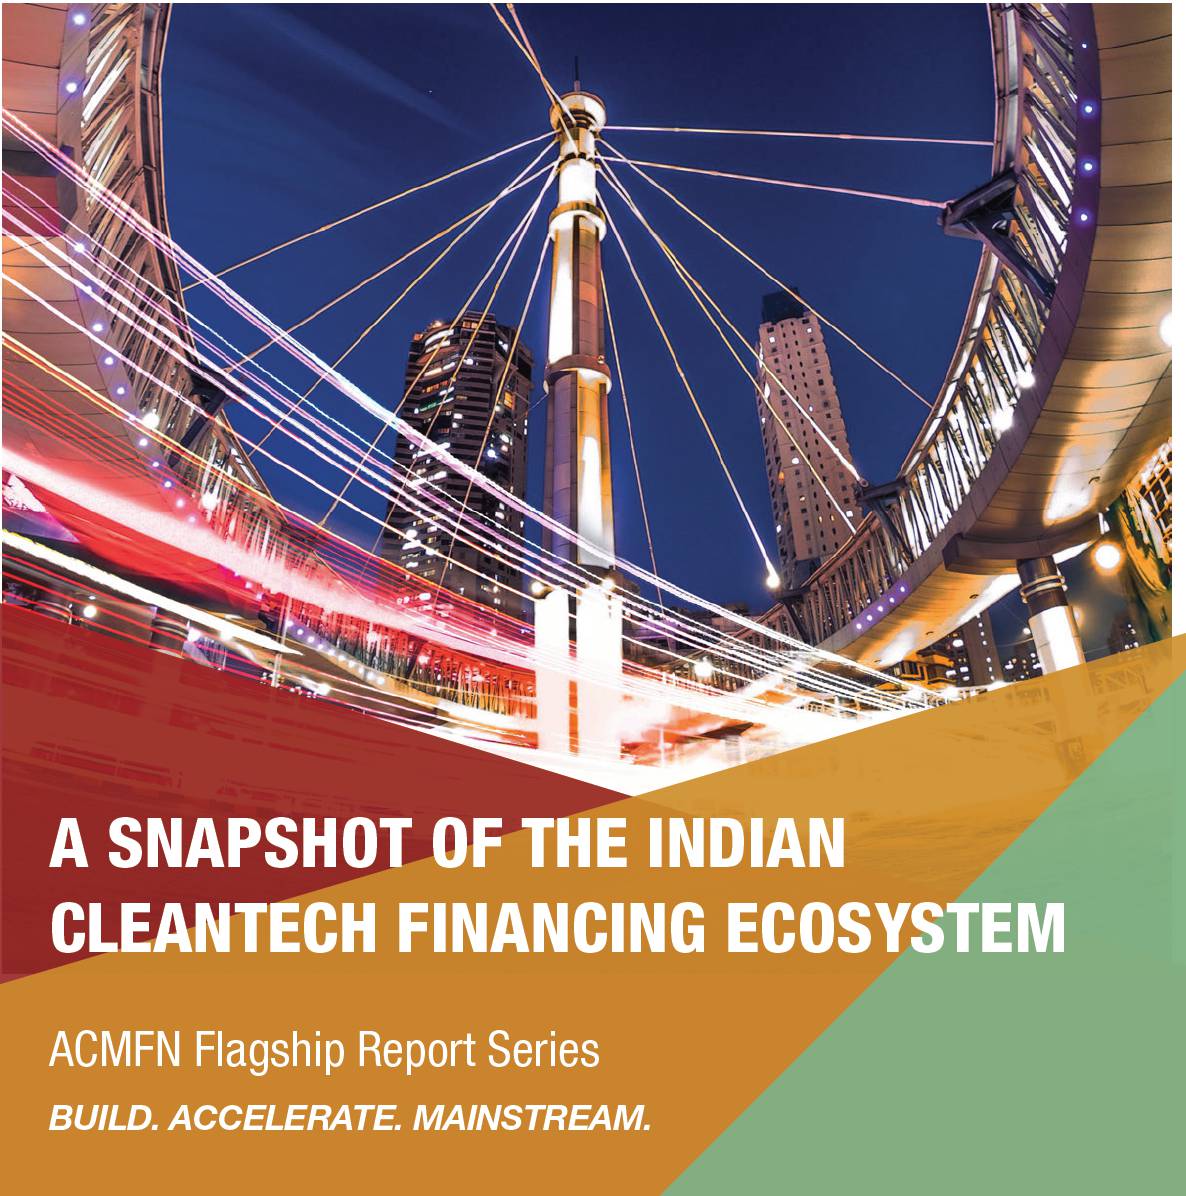 ACMFN Flagship Report Series - India